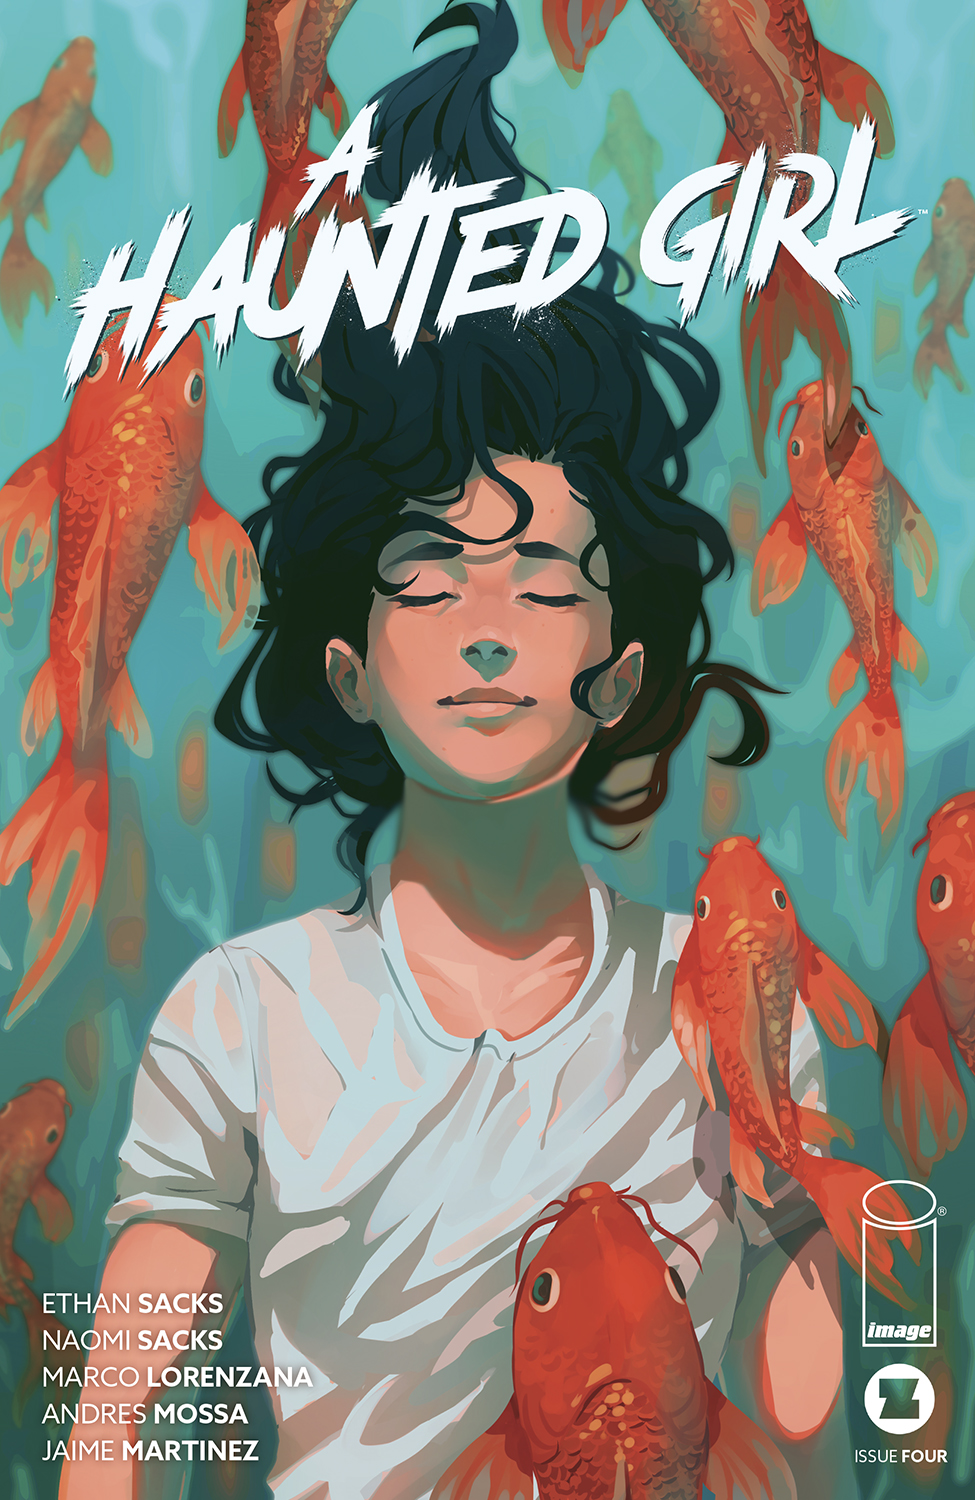 A Haunted Girl #4 Cover C 1 for 10 Incentive Cherrielle Variant (Of 4)